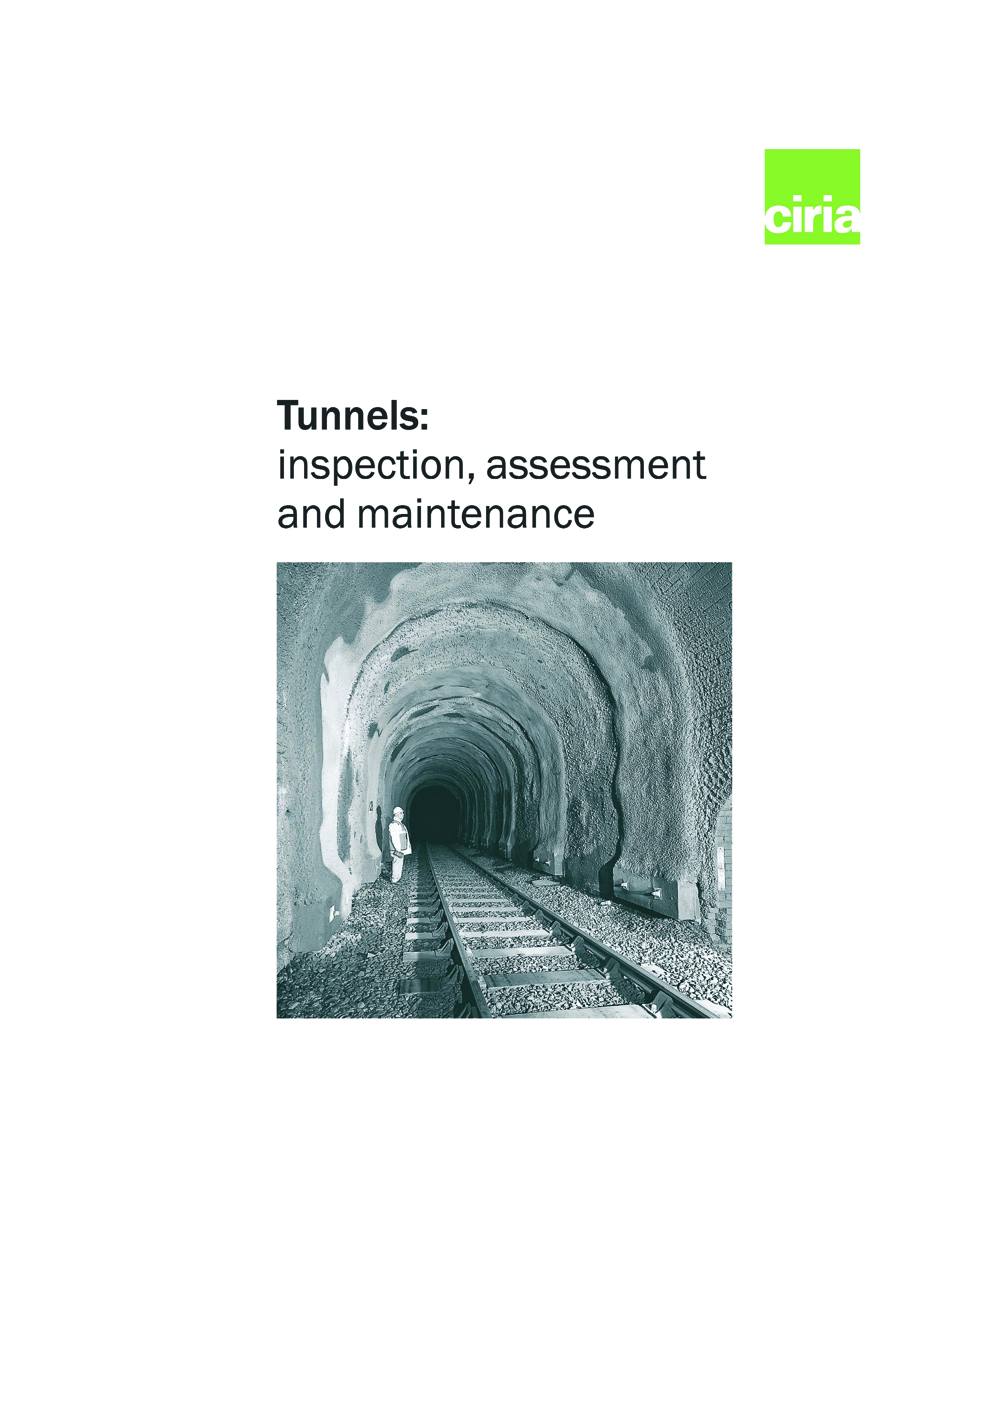 Tunnels: inspection, assessment and maintenance